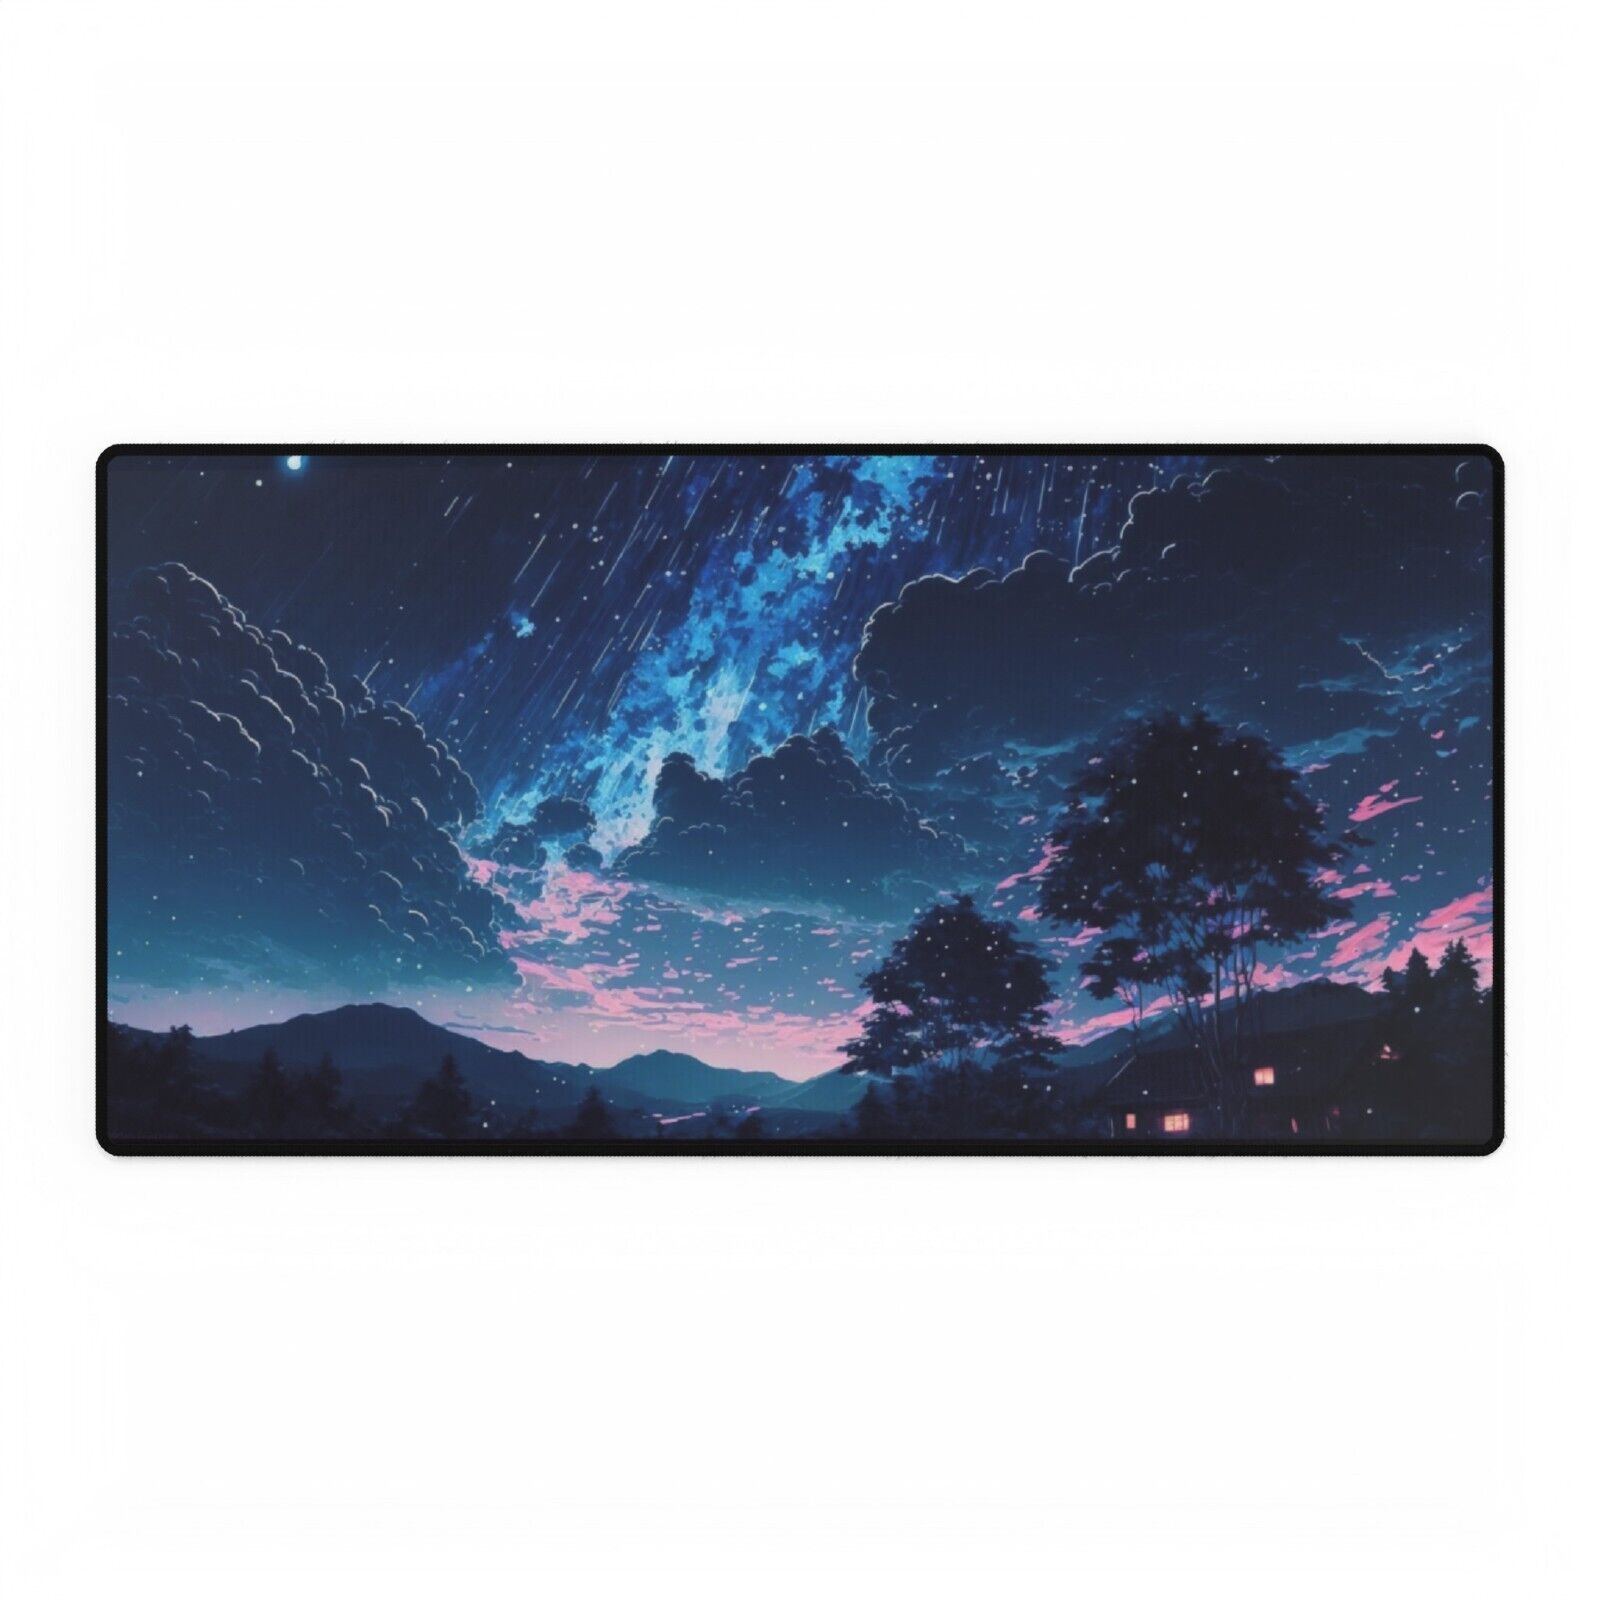 Starry Night anime art style scenery 4K - New and Unique Gaming Mousepad/DeskMat